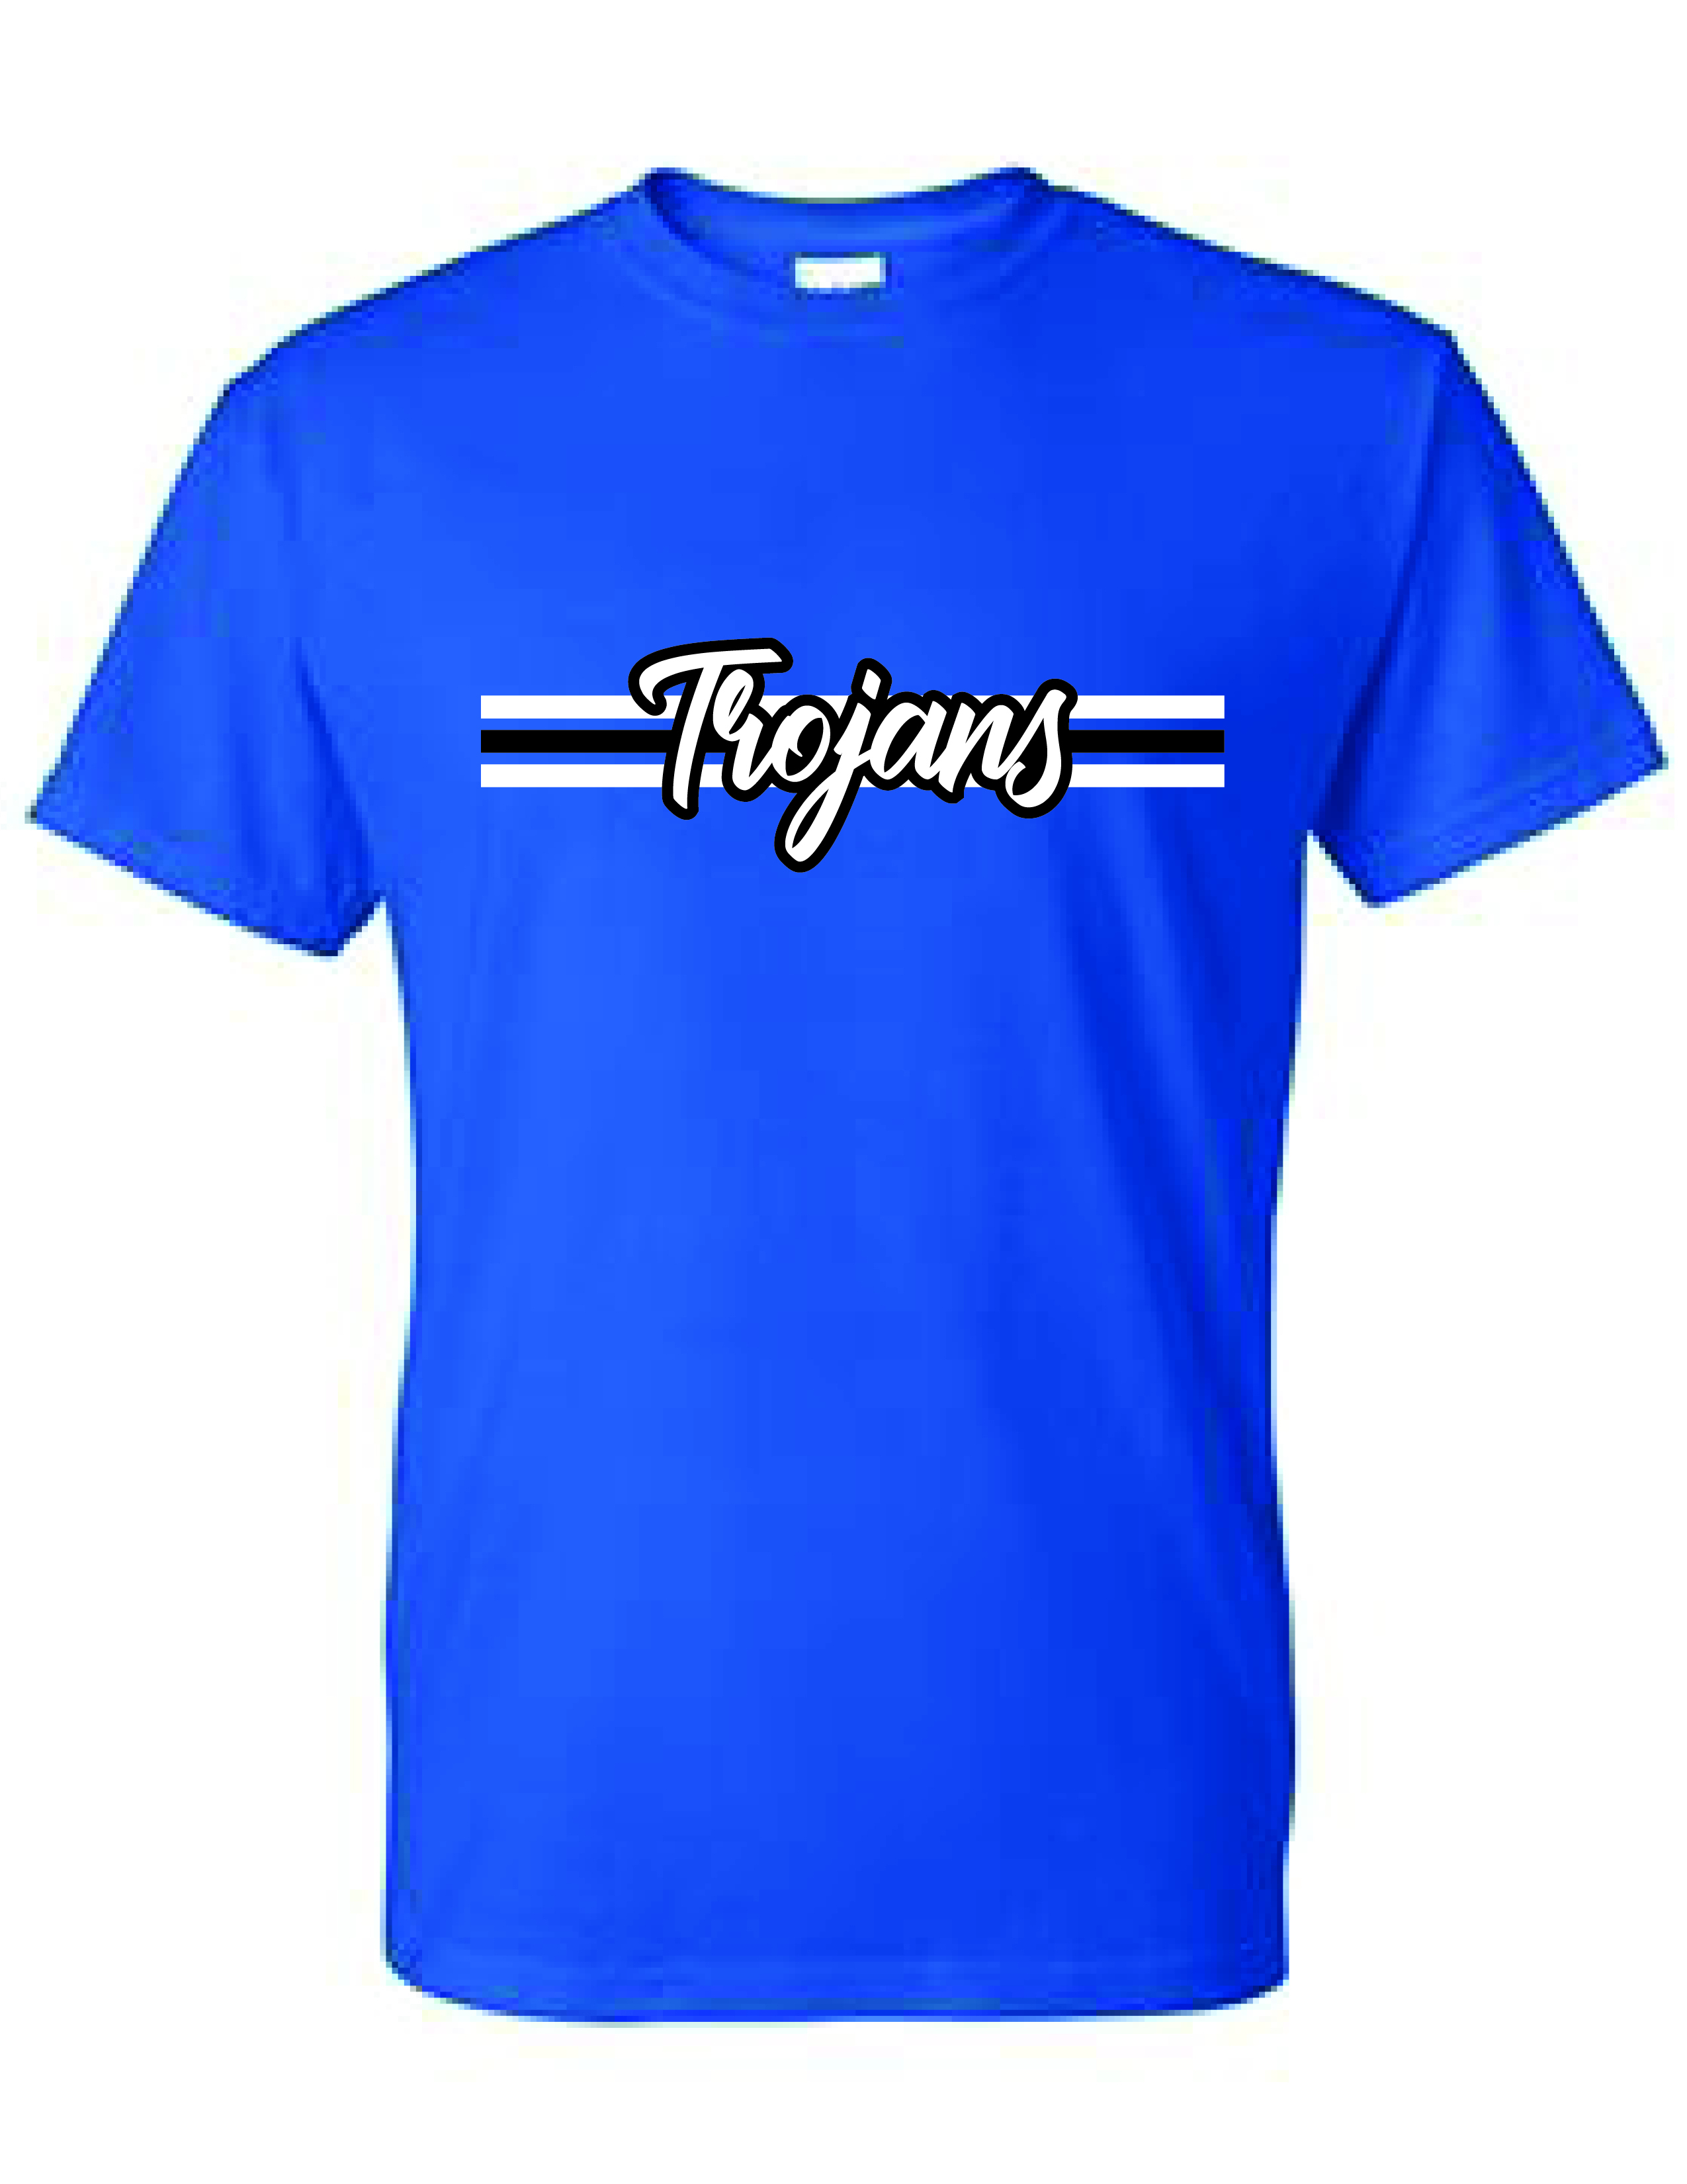 TROJAN SHORT SLEEVE (Mens' and Youth sizes)